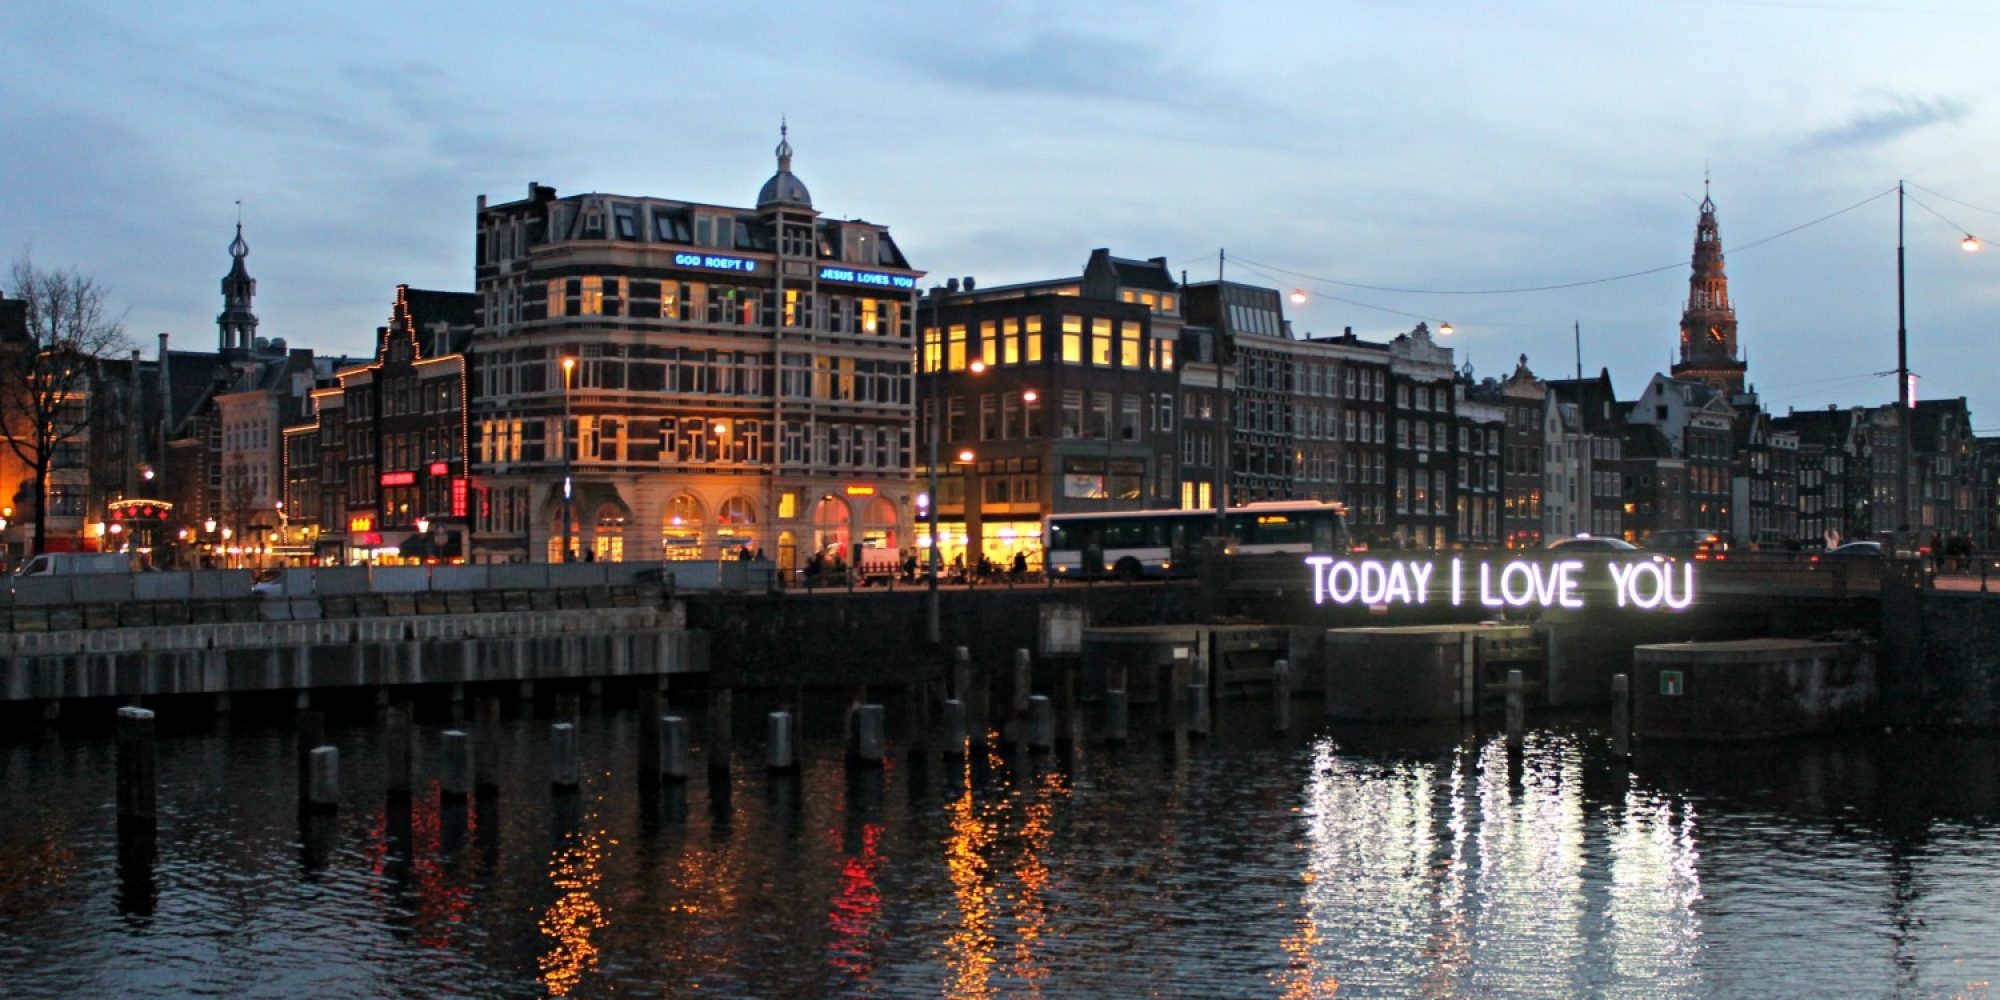 Today-I-love-you-Amsterdam